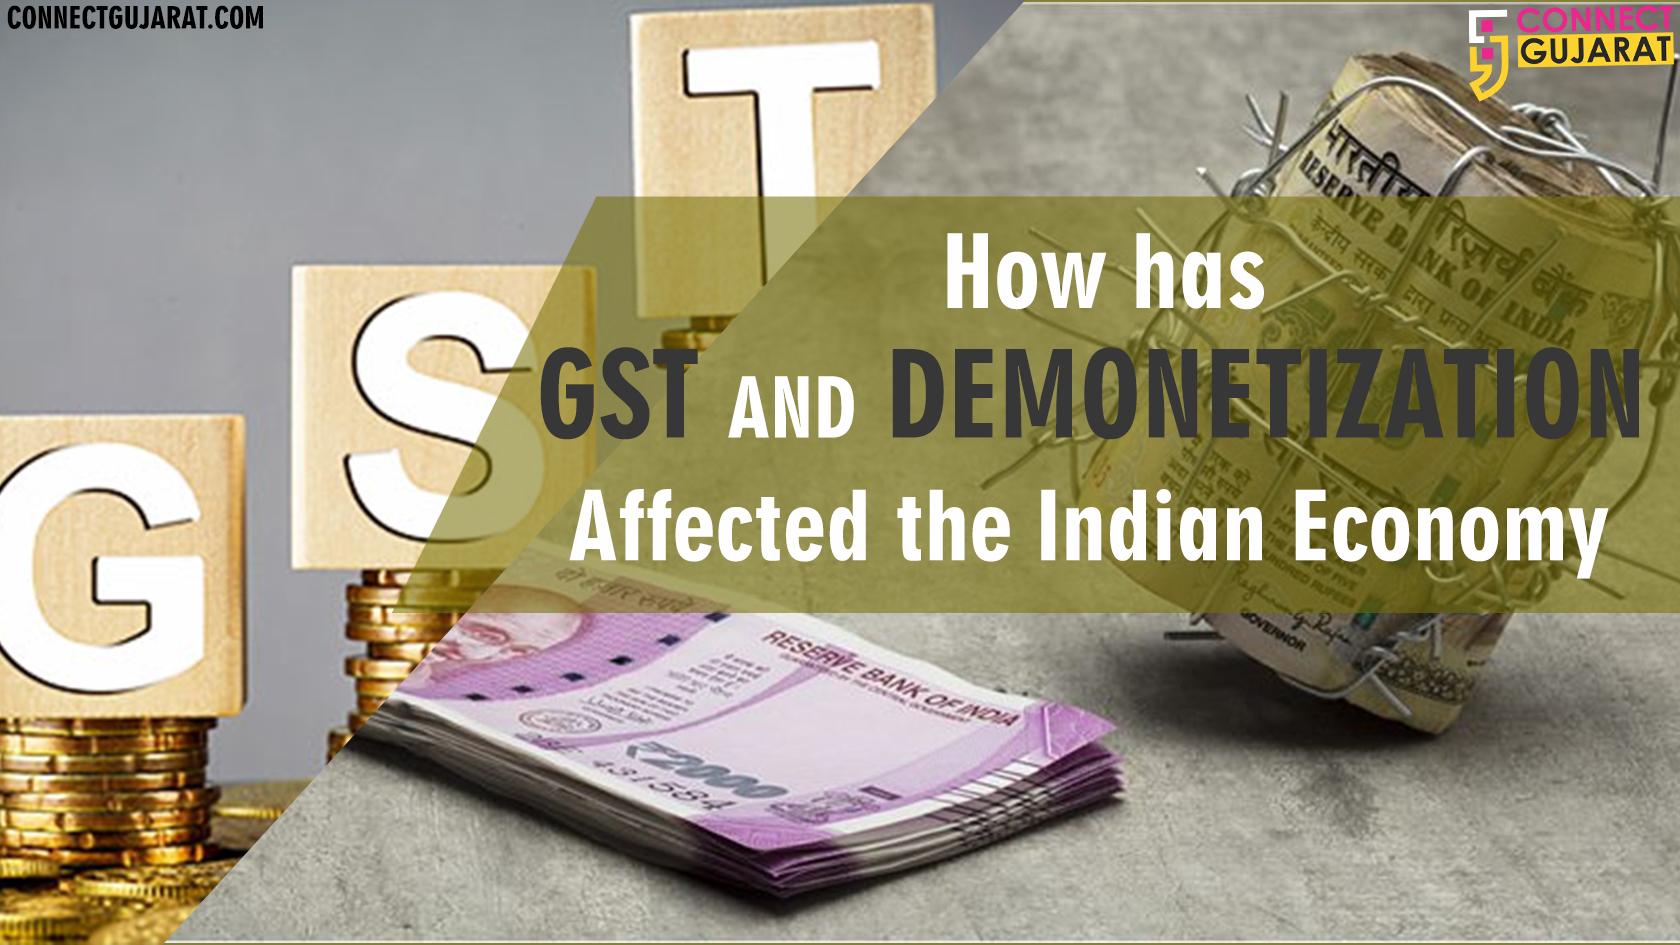 How has GST and Demonetization affected the Indian Economy?